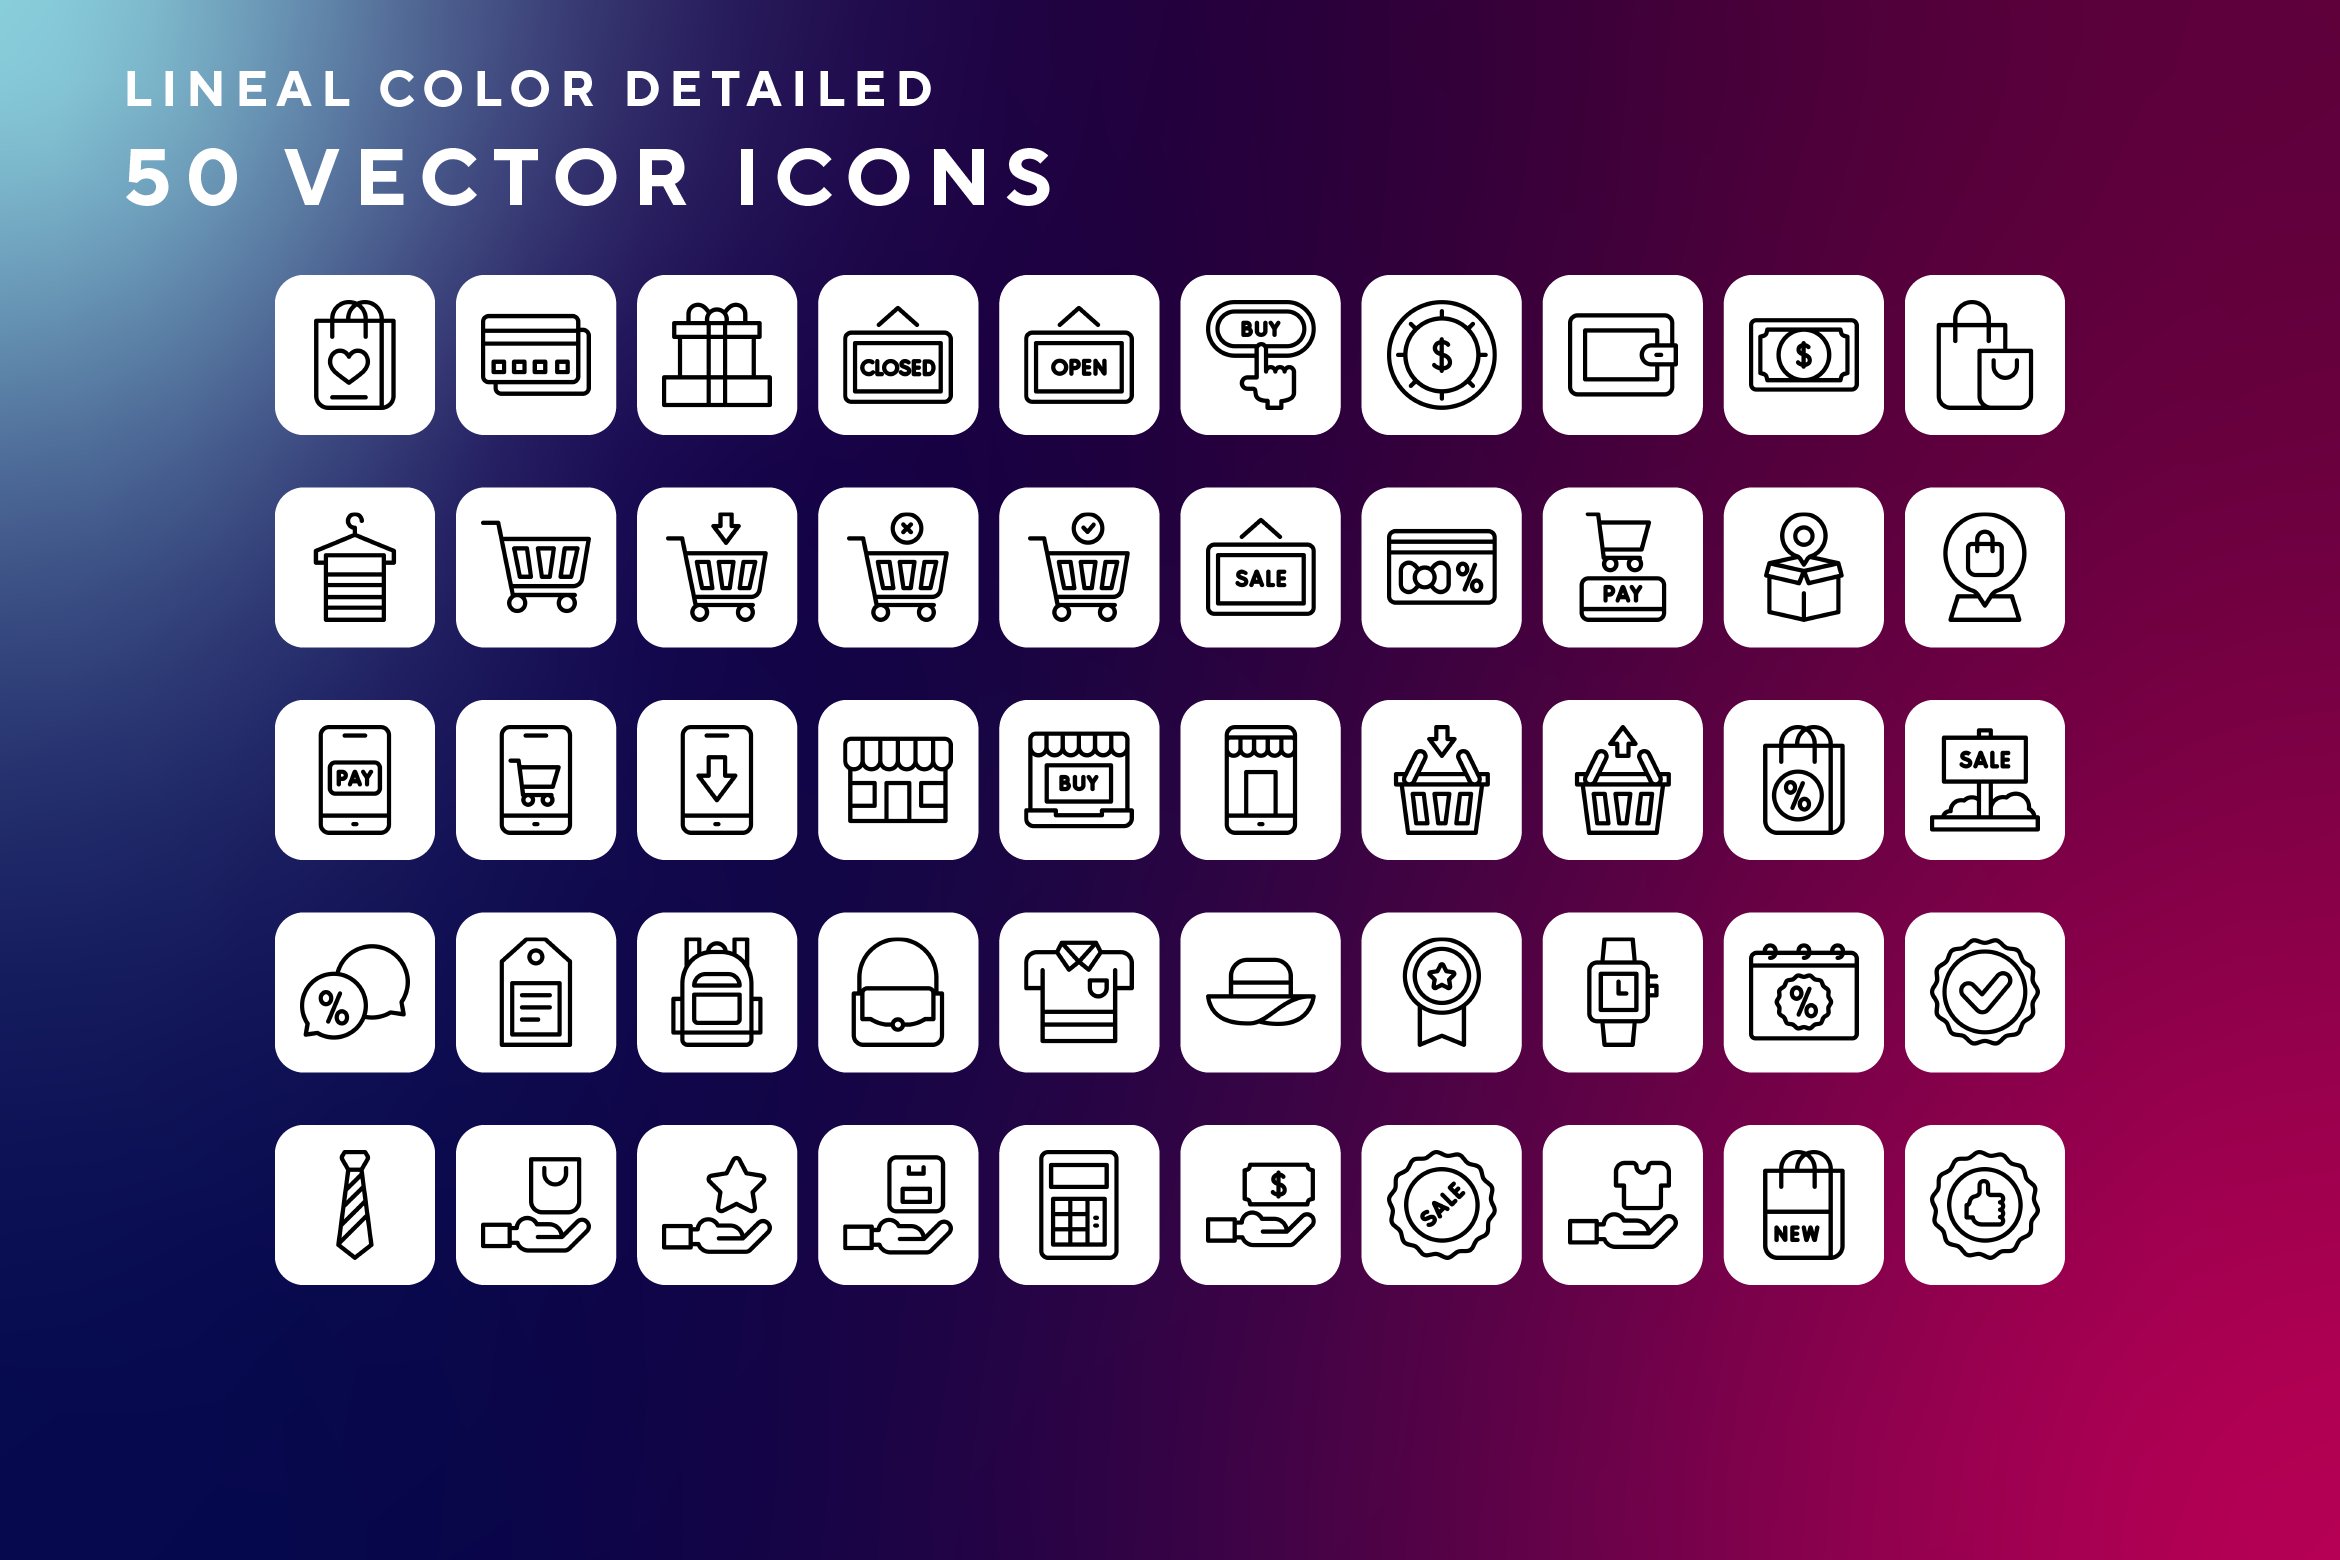 Shopping icons cover image.